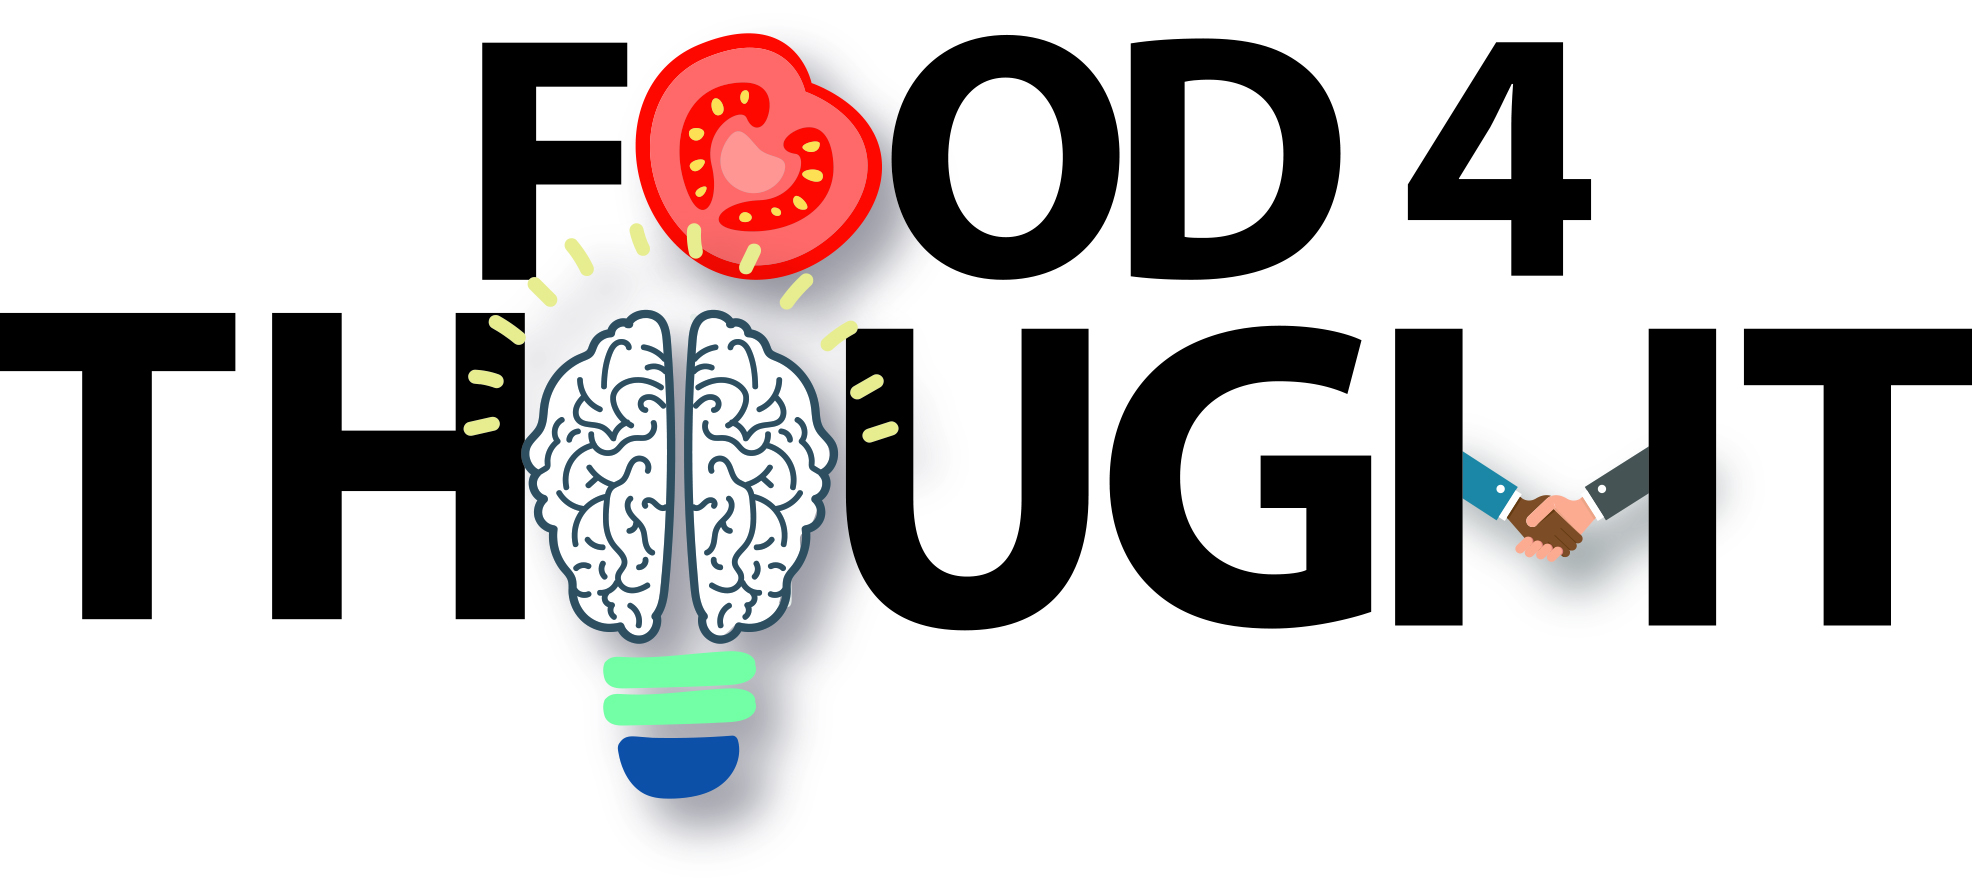 Food for thought logo